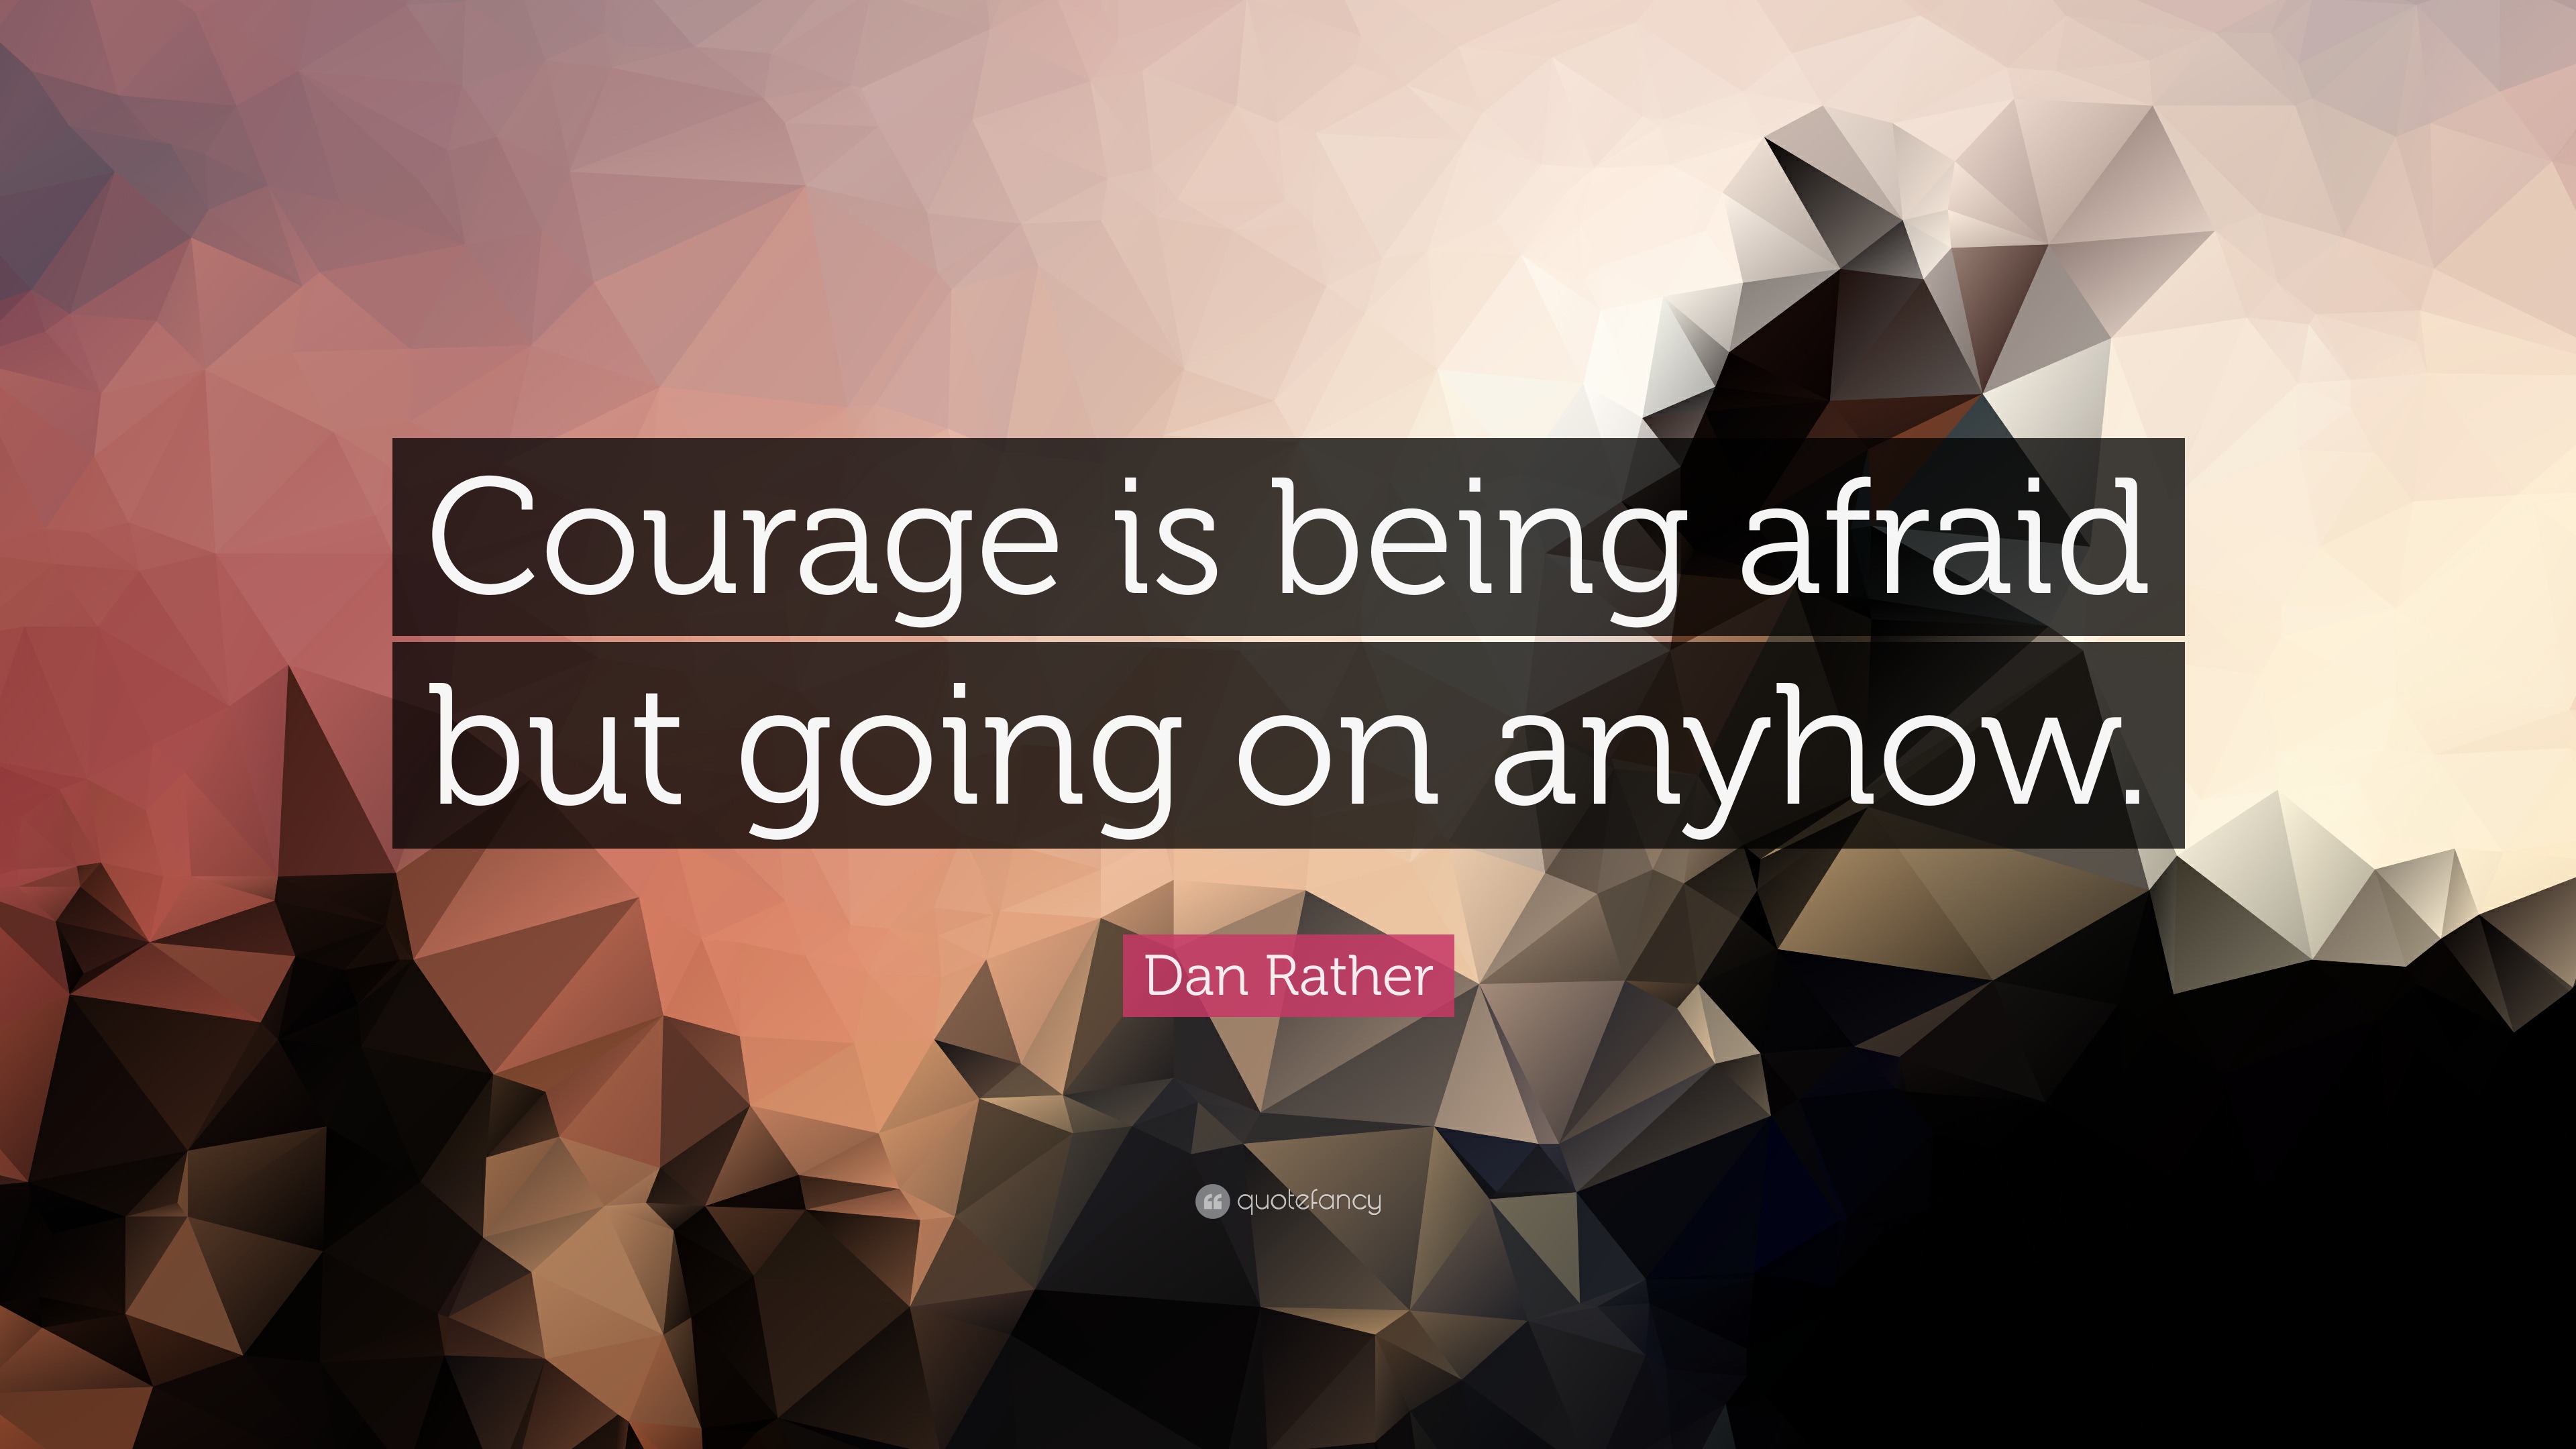 Dan Rather Quote: “Courage is being afraid but going on anyhow.”